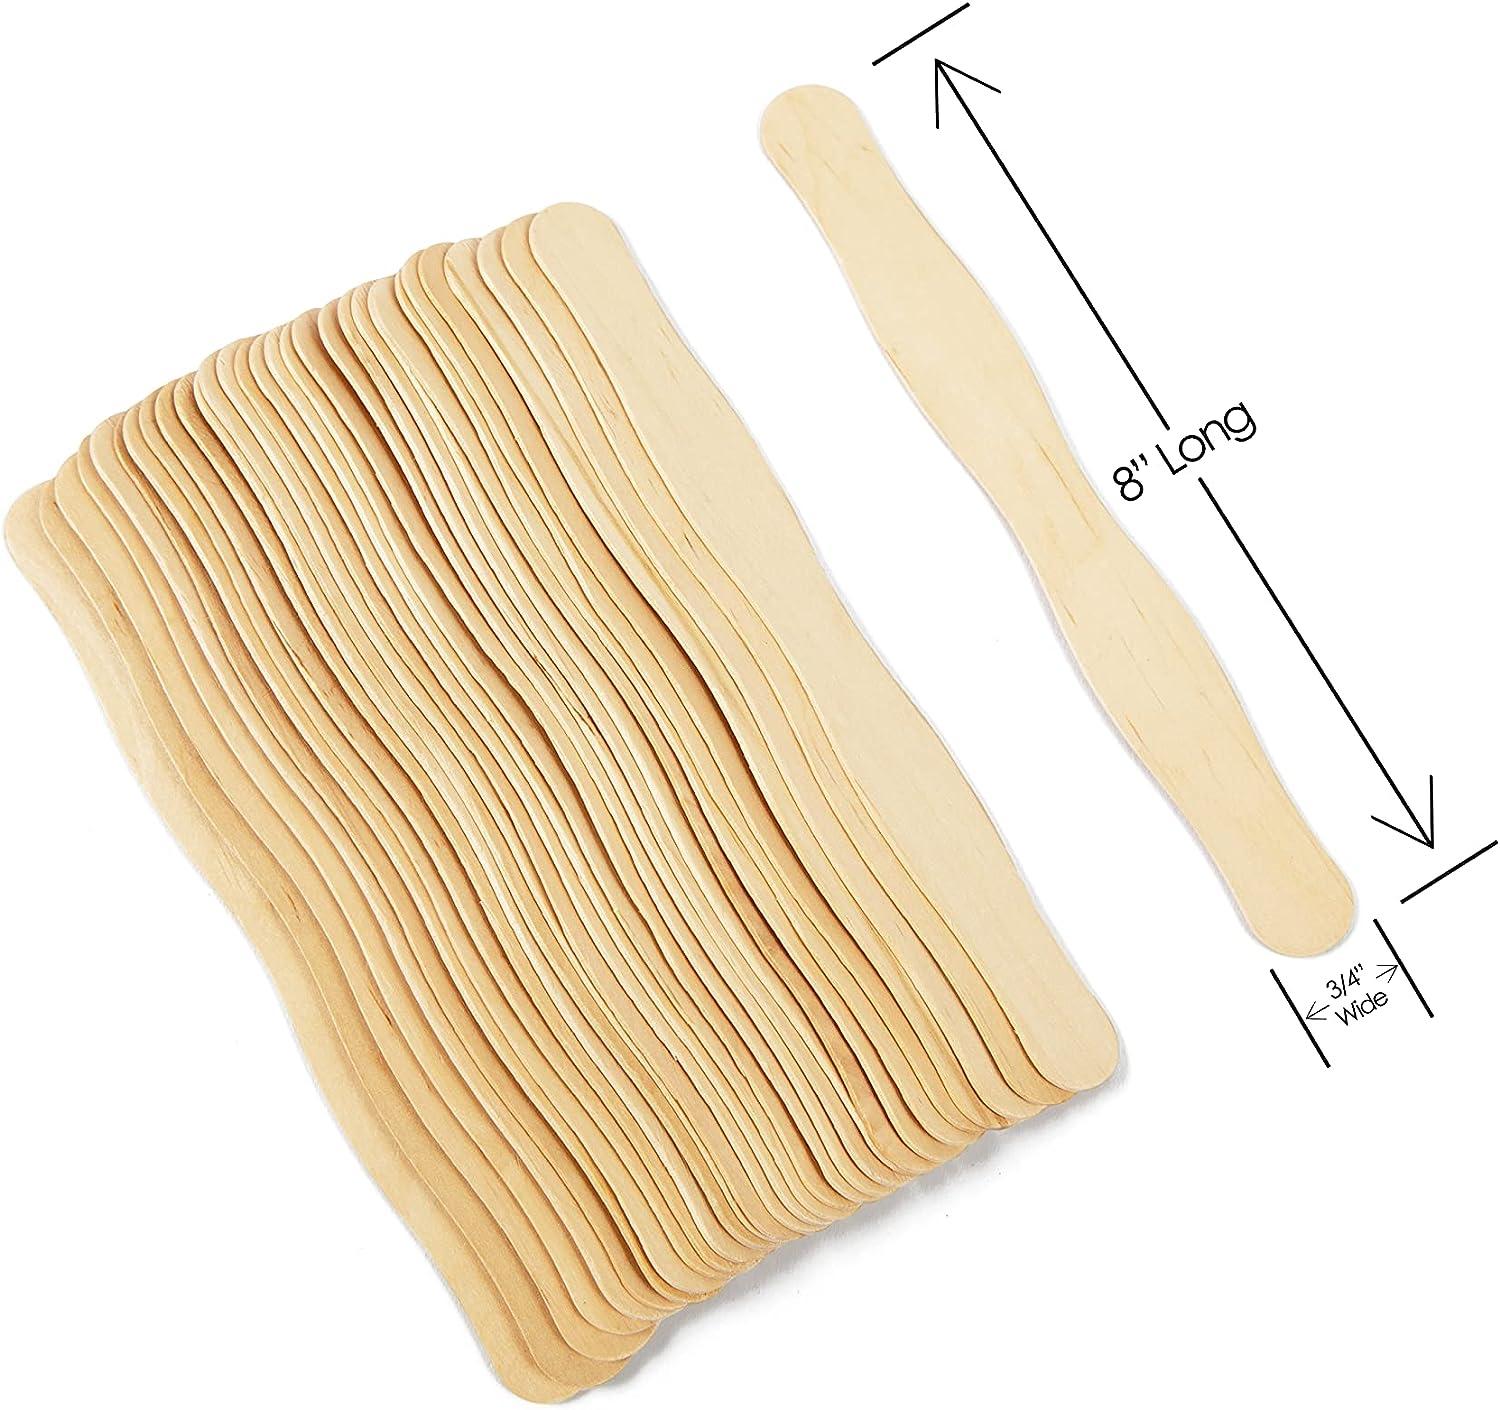 50 Pack Craft Sticks, 8 inch Wood Wavy Sticks, Fan Handles, Large Popsicle  sticks for Crafts, Wedding Programs, DIY Crafting, Painting 